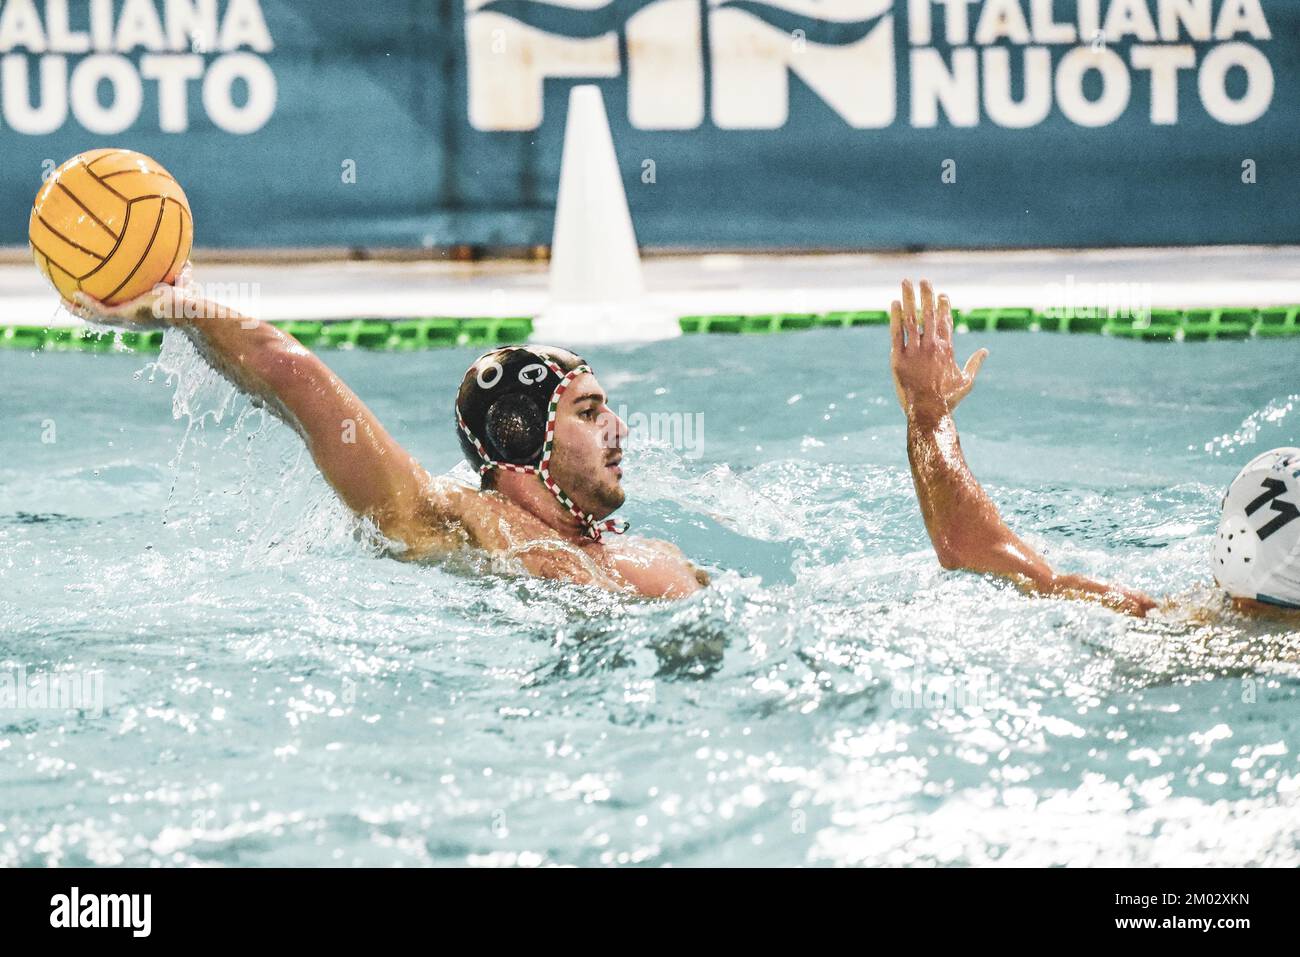 Anzio, Italy. 03rd Dec, 2022. Cannella(Pro Recco) during Anzio Waterpolis vs Pro Recco, Waterpolo Italian Serie A match in Anzio, Italy, December 03 2022 Credit: Independent Photo Agency/Alamy Live News Stock Photo